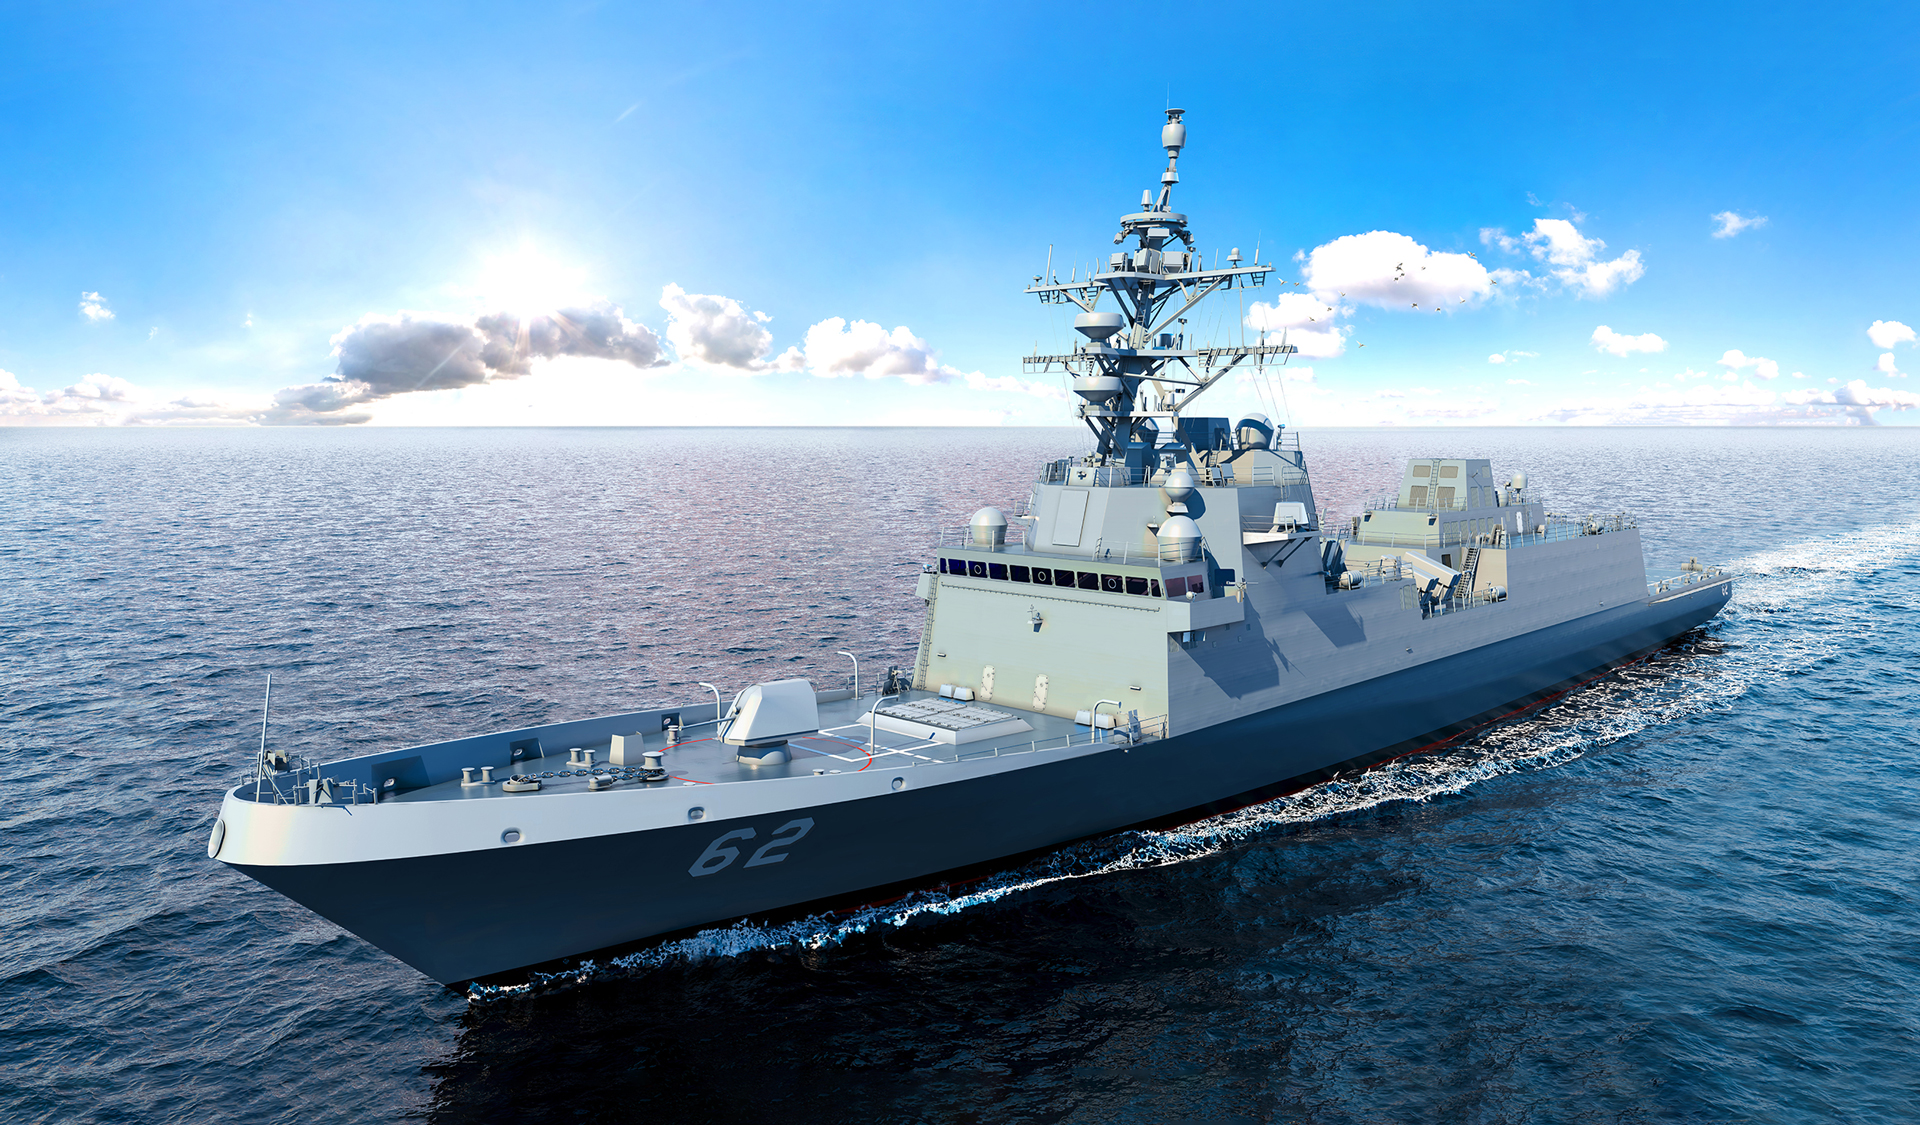 Aegis Software Delivered Early to the U.S. Navy’s FFG 62 | Lockheed Martin